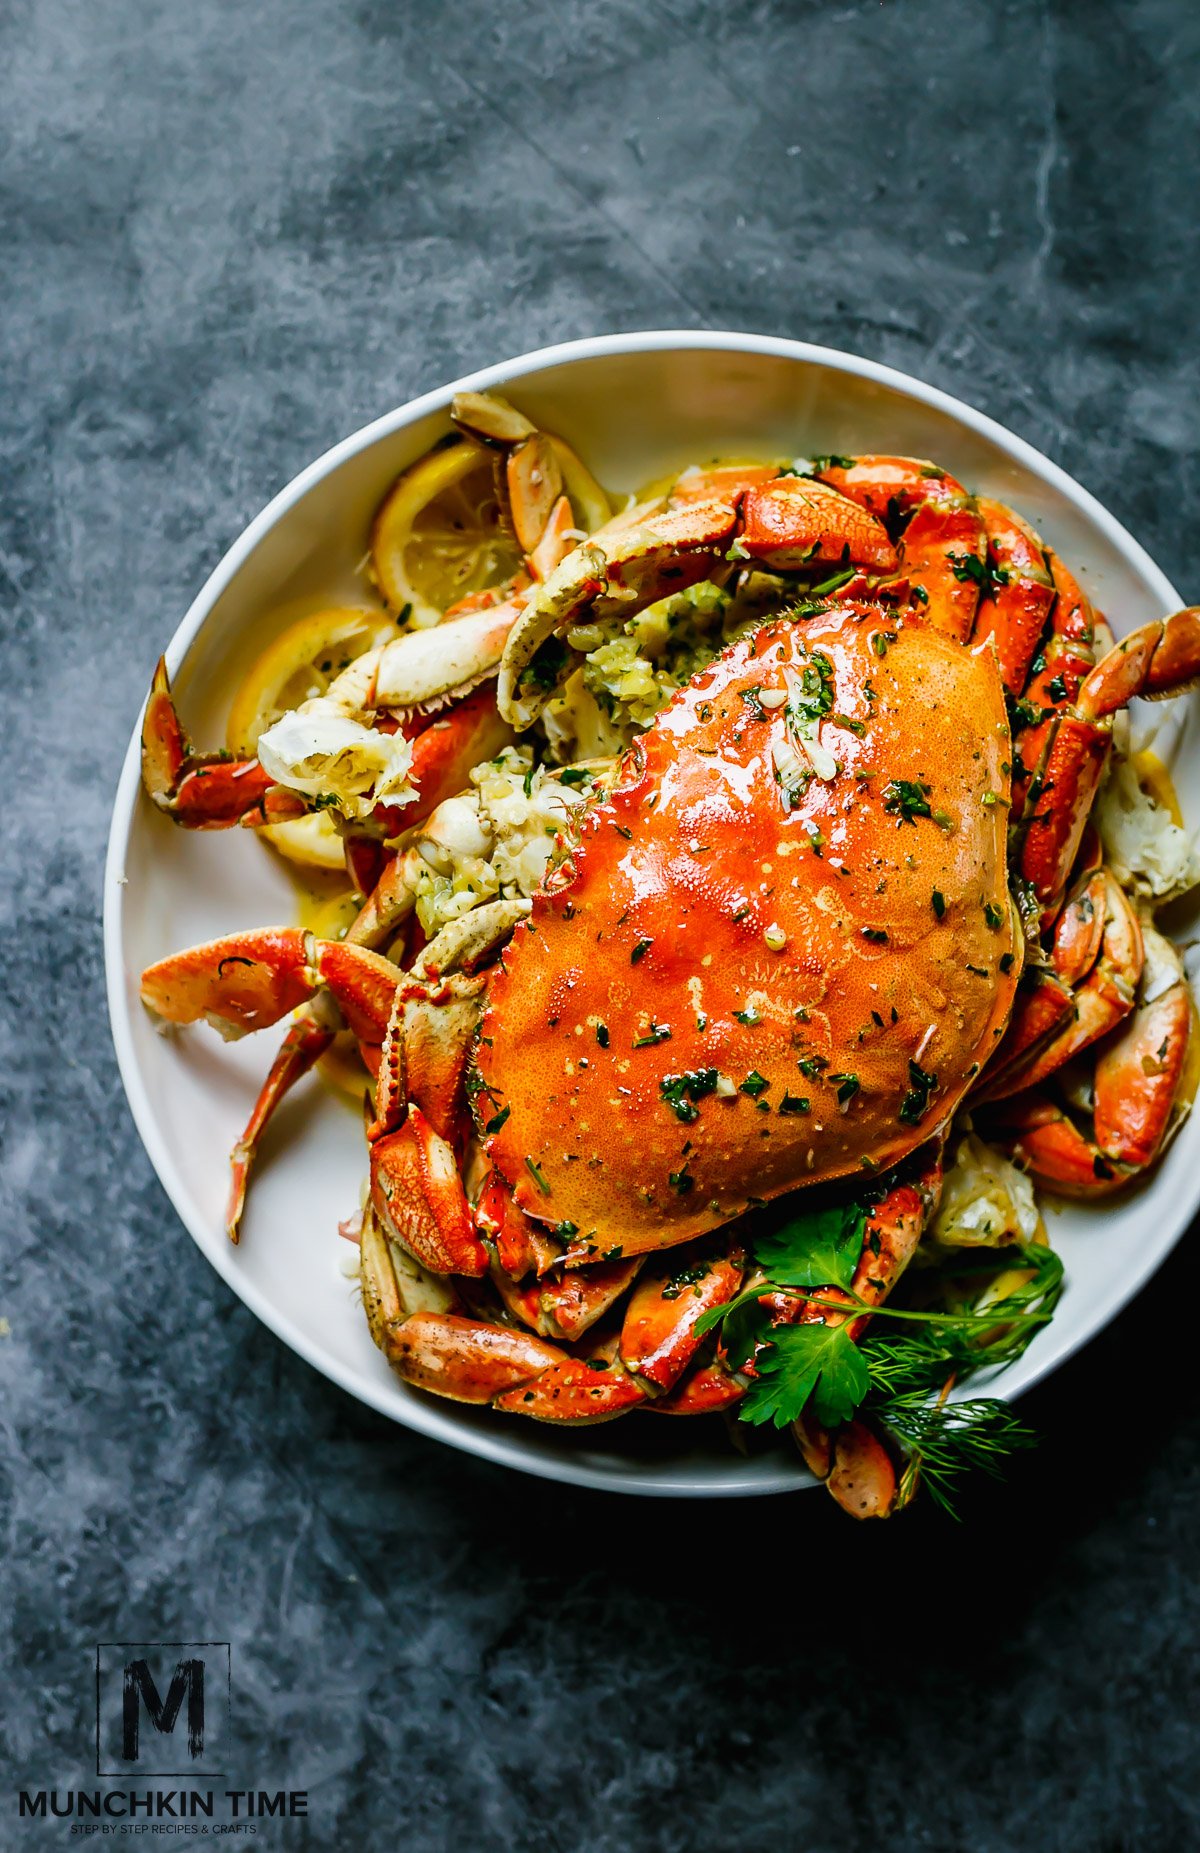 The Best Oven-Roasted Dungeness Crab Recipe